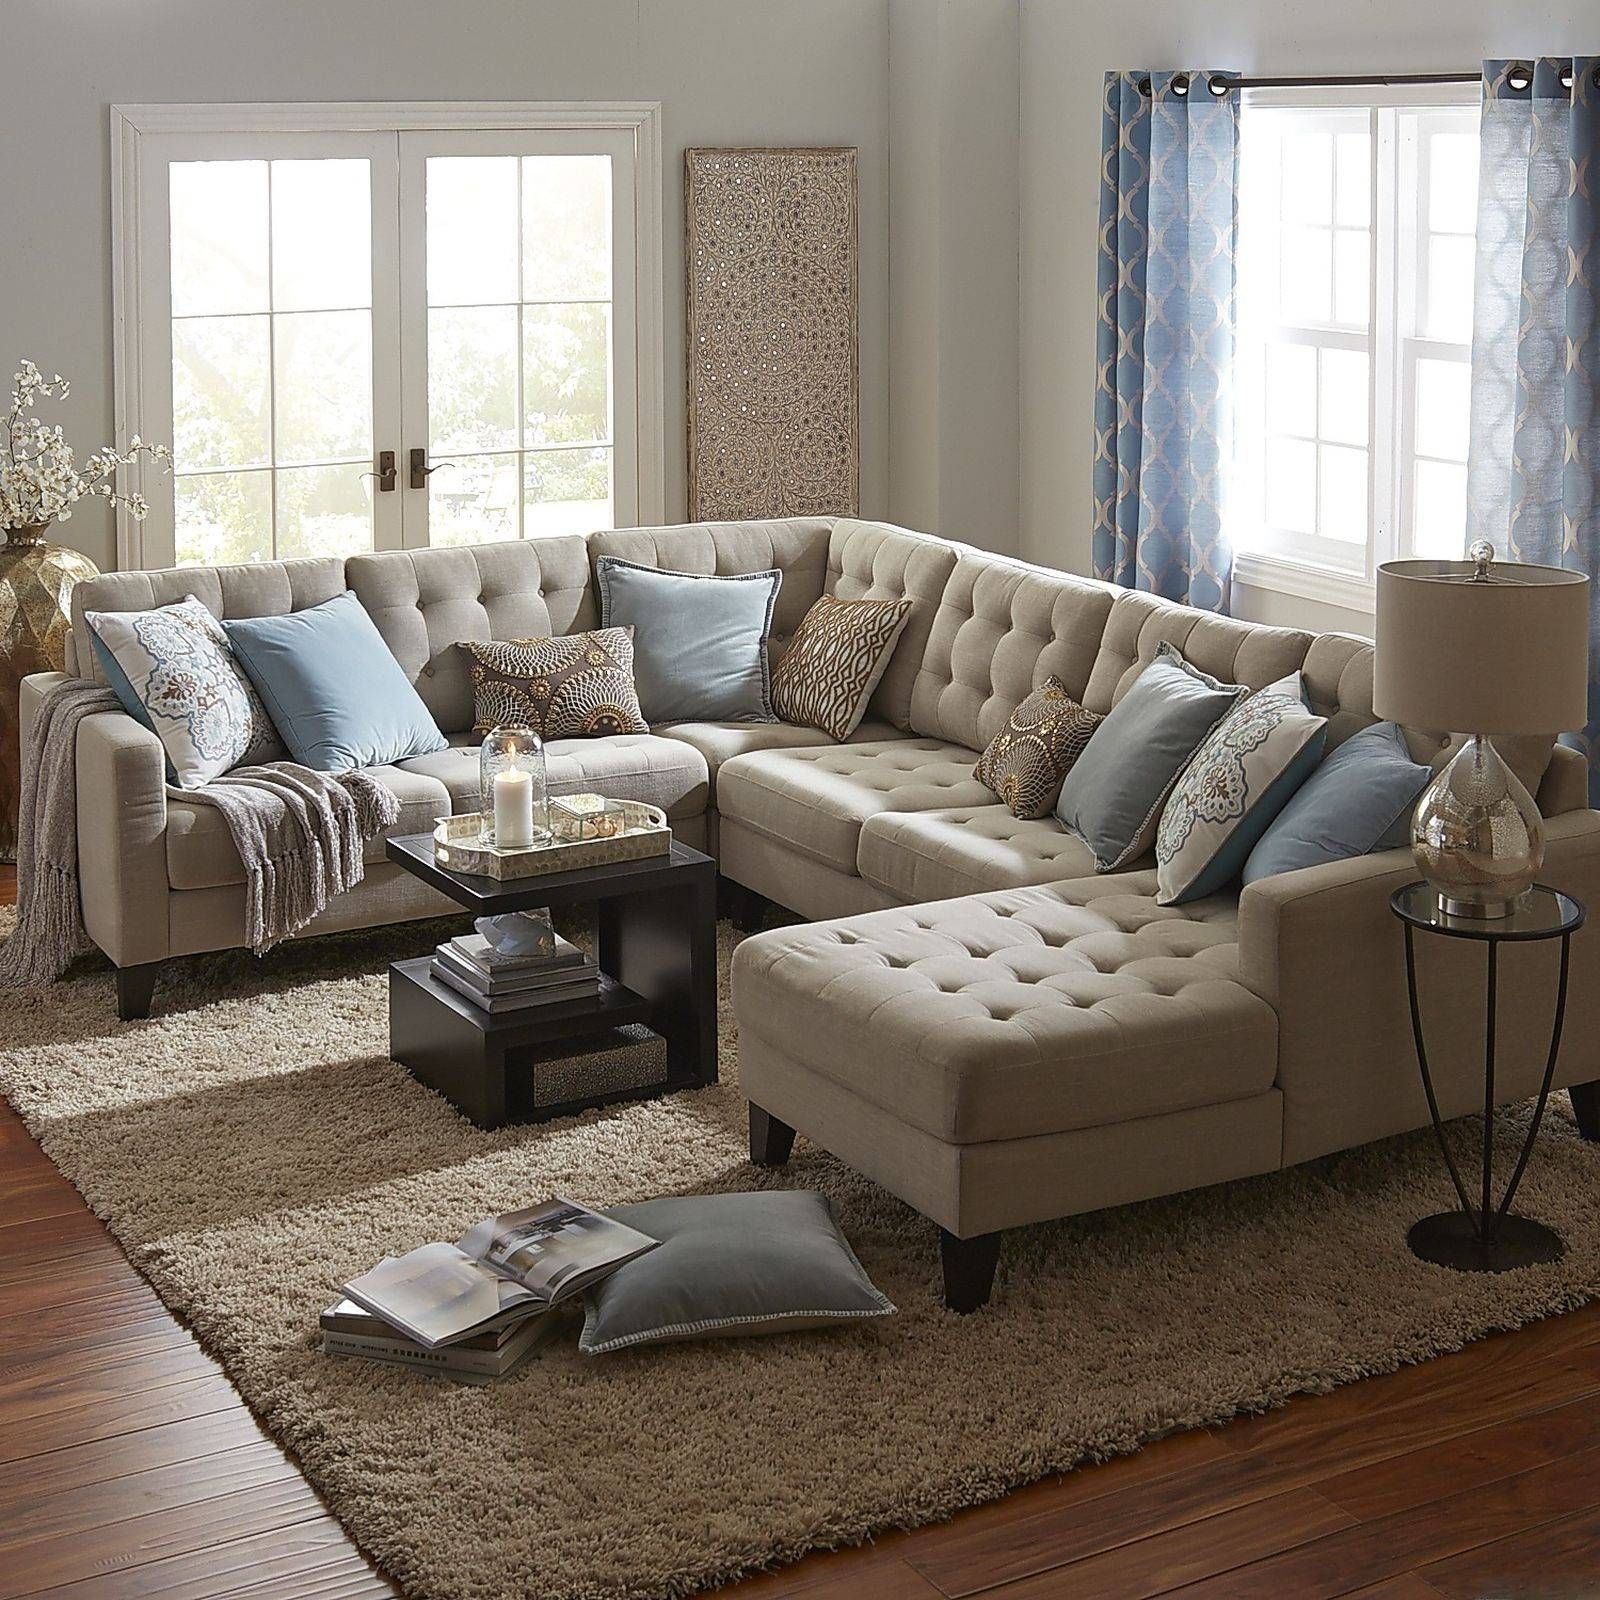 Sofas Center : Sofasnd Sectionals Fascinating Cheap U Shaped With Media Sofa Sectionals (View 7 of 25)